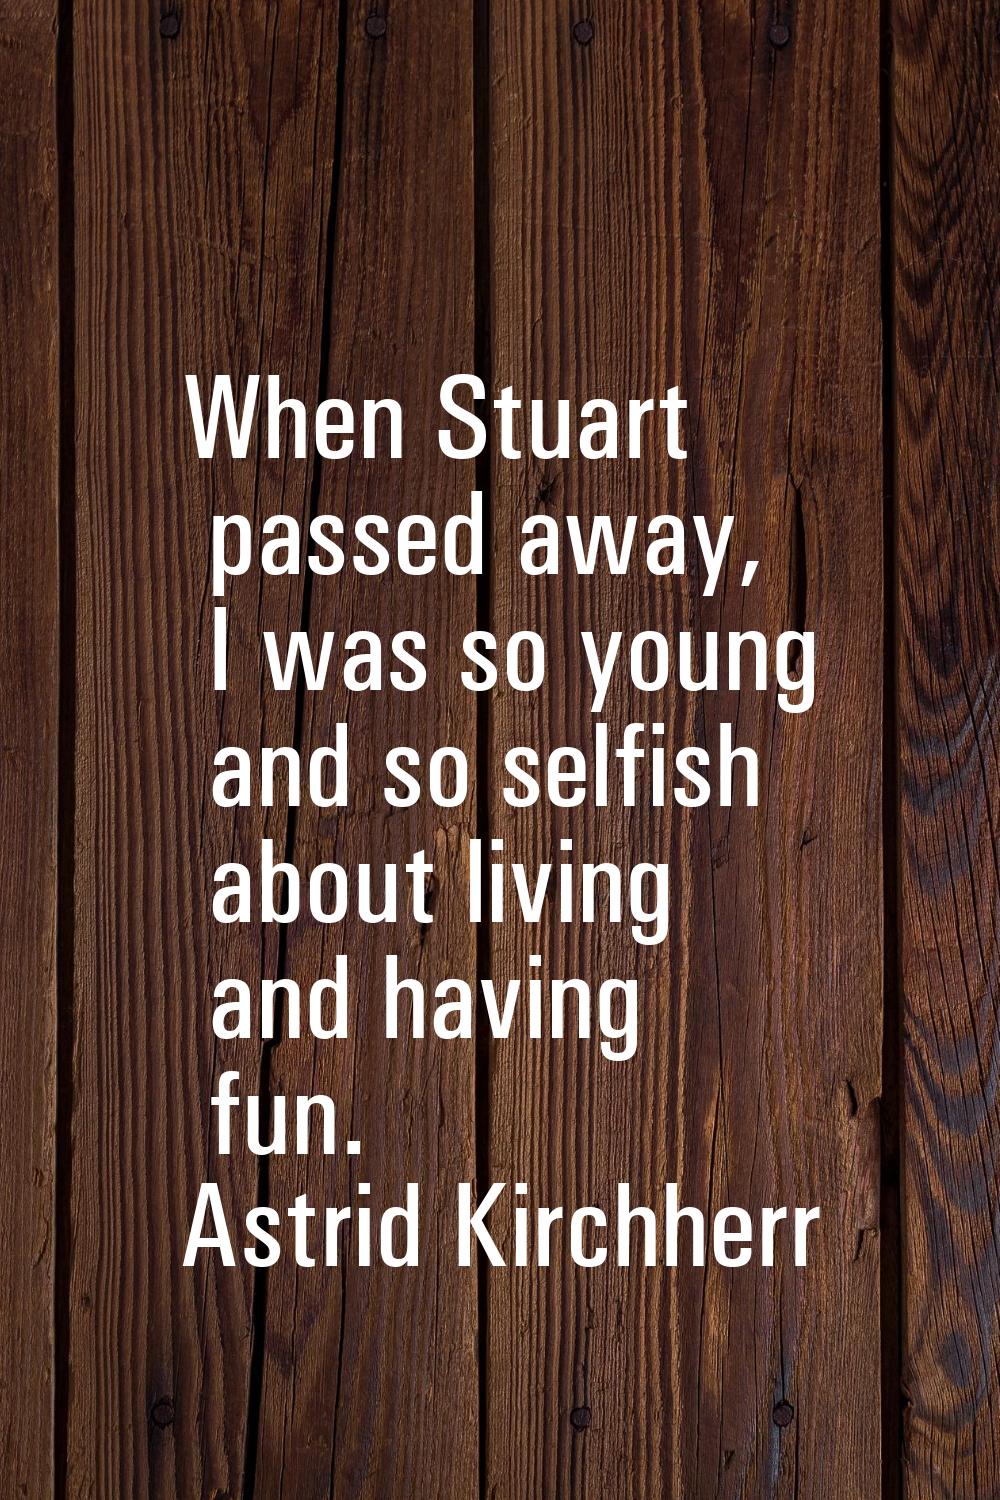 When Stuart passed away, I was so young and so selfish about living and having fun.